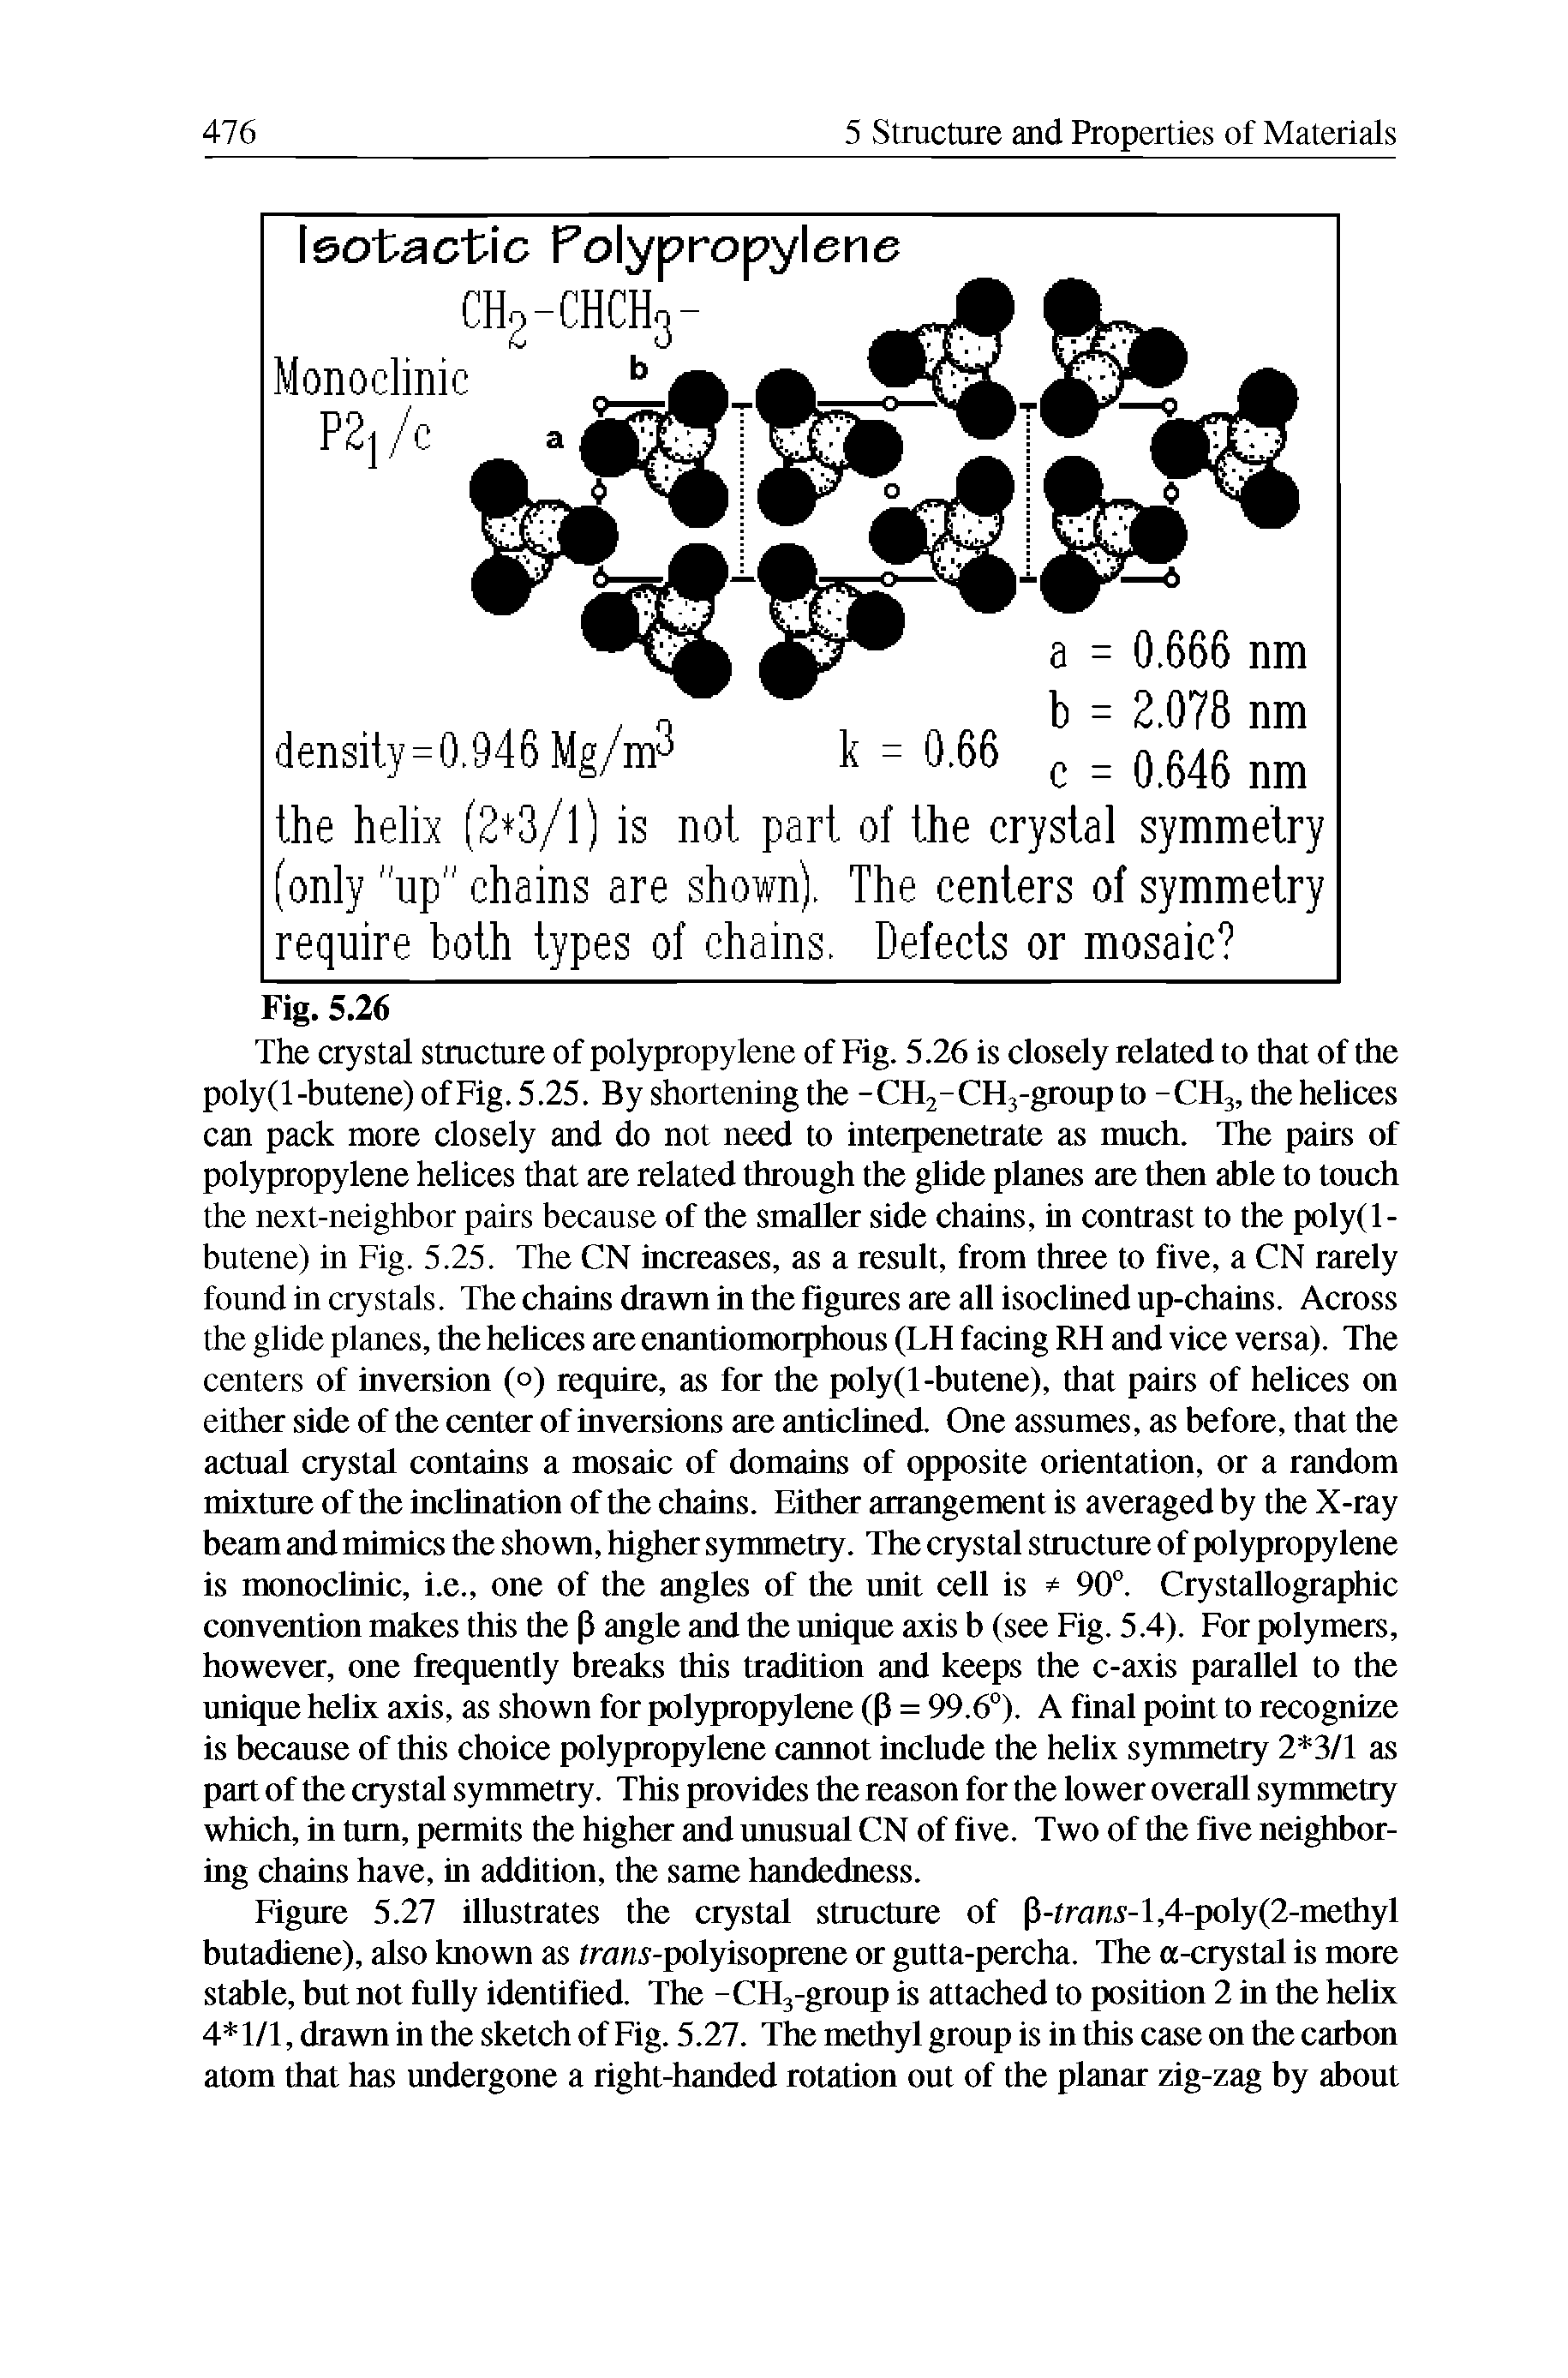 Figure 5.27 illustrates the crystal structure of P-tra i -l,4-poly(2-methyl butadiene), also known as traw -polyisoprene or gutta-percha. The a-crystal is more stable, but not fully identified. The -CHj-group is attached to position 2 in the helix 4 1/1, drawn in the sketch of Fig. 5.27. The methyl group is in this case on the carbon atom that has undergone a right-handed rotation out of the planar zig-zag by about...